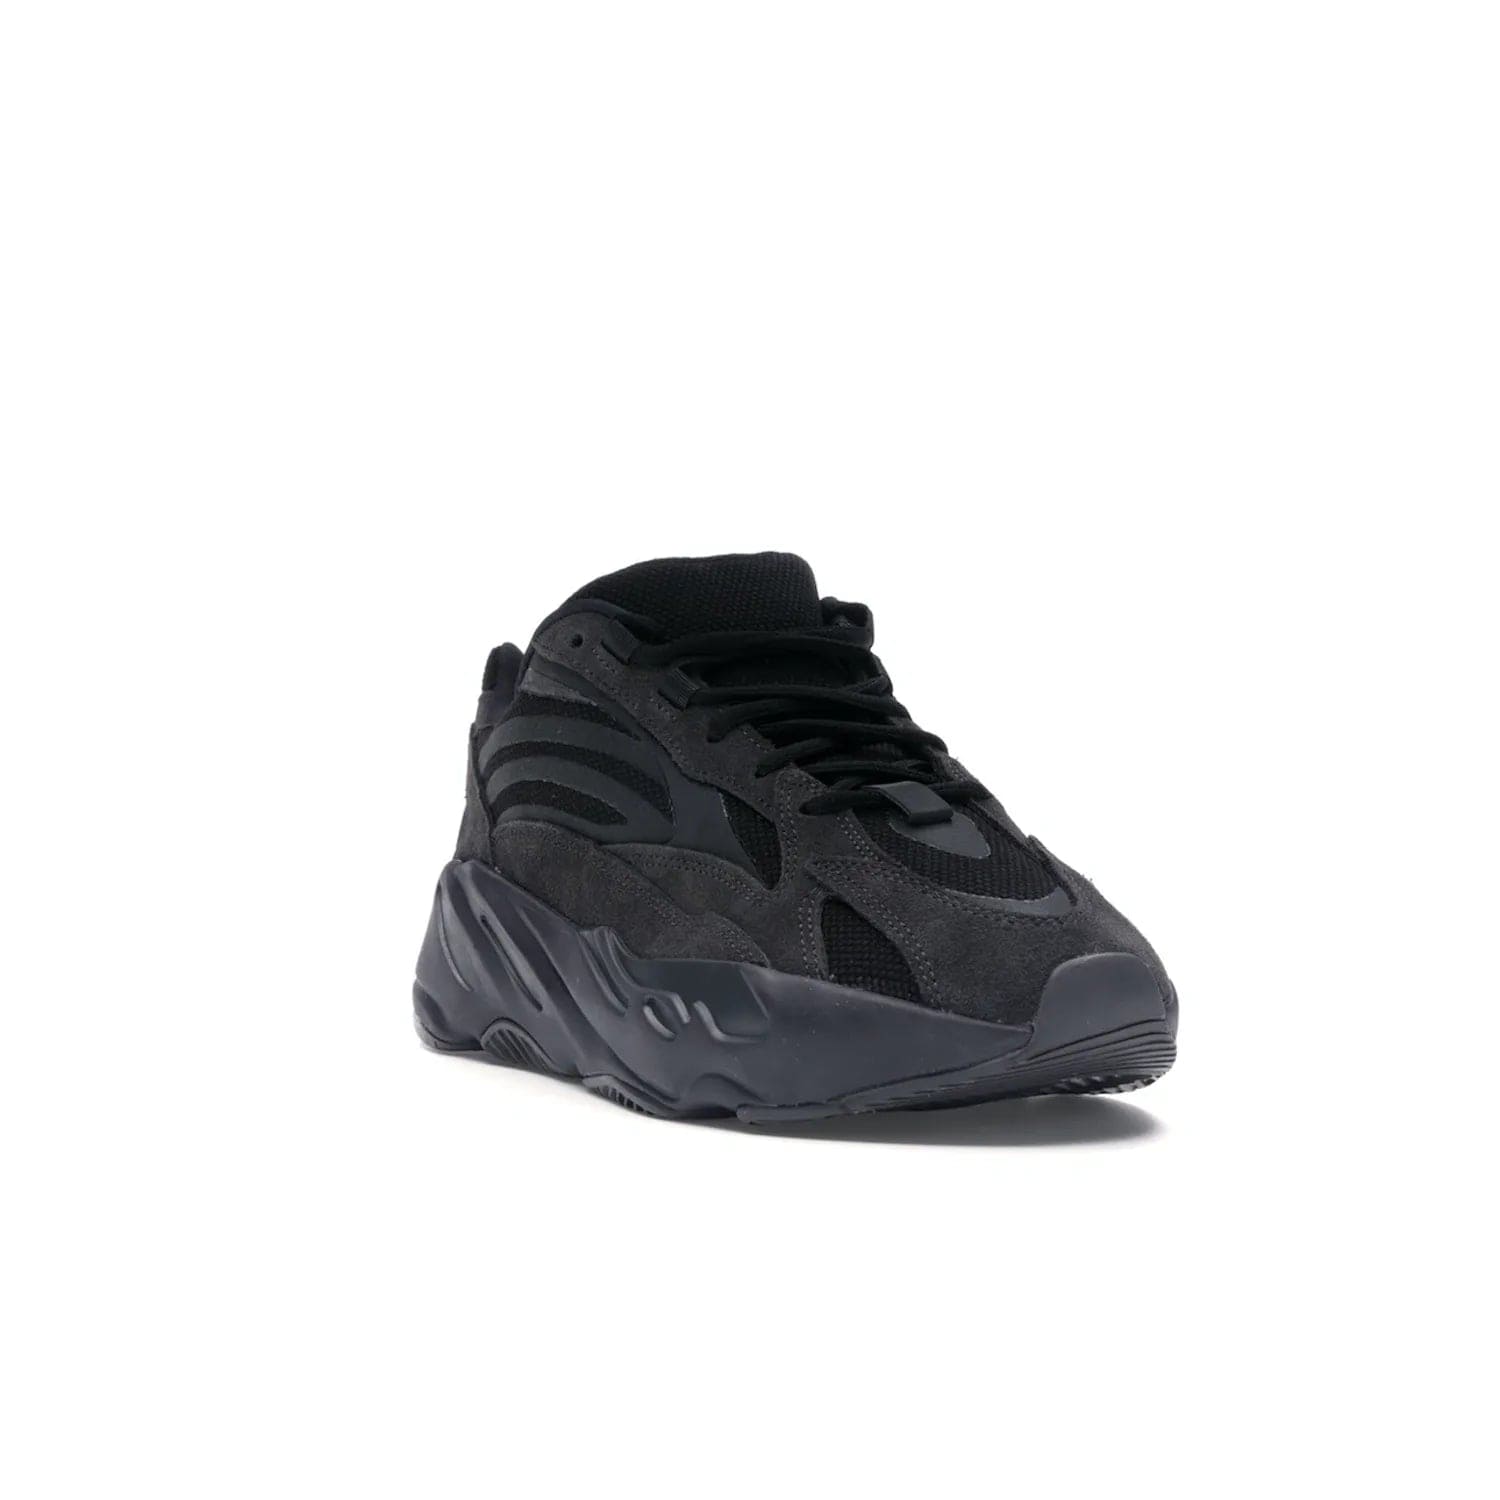 adidas Yeezy Boost 700 V2 Vanta - Image 7 - Only at www.BallersClubKickz.com - Introducing the adidas Yeezy Boost 700 V2 Vanta - a sleek and stylish all-black design featuring a combination of mesh, leather, and suede construction with signature Boost cushioning in the sole. The ultimate in comfort and support.